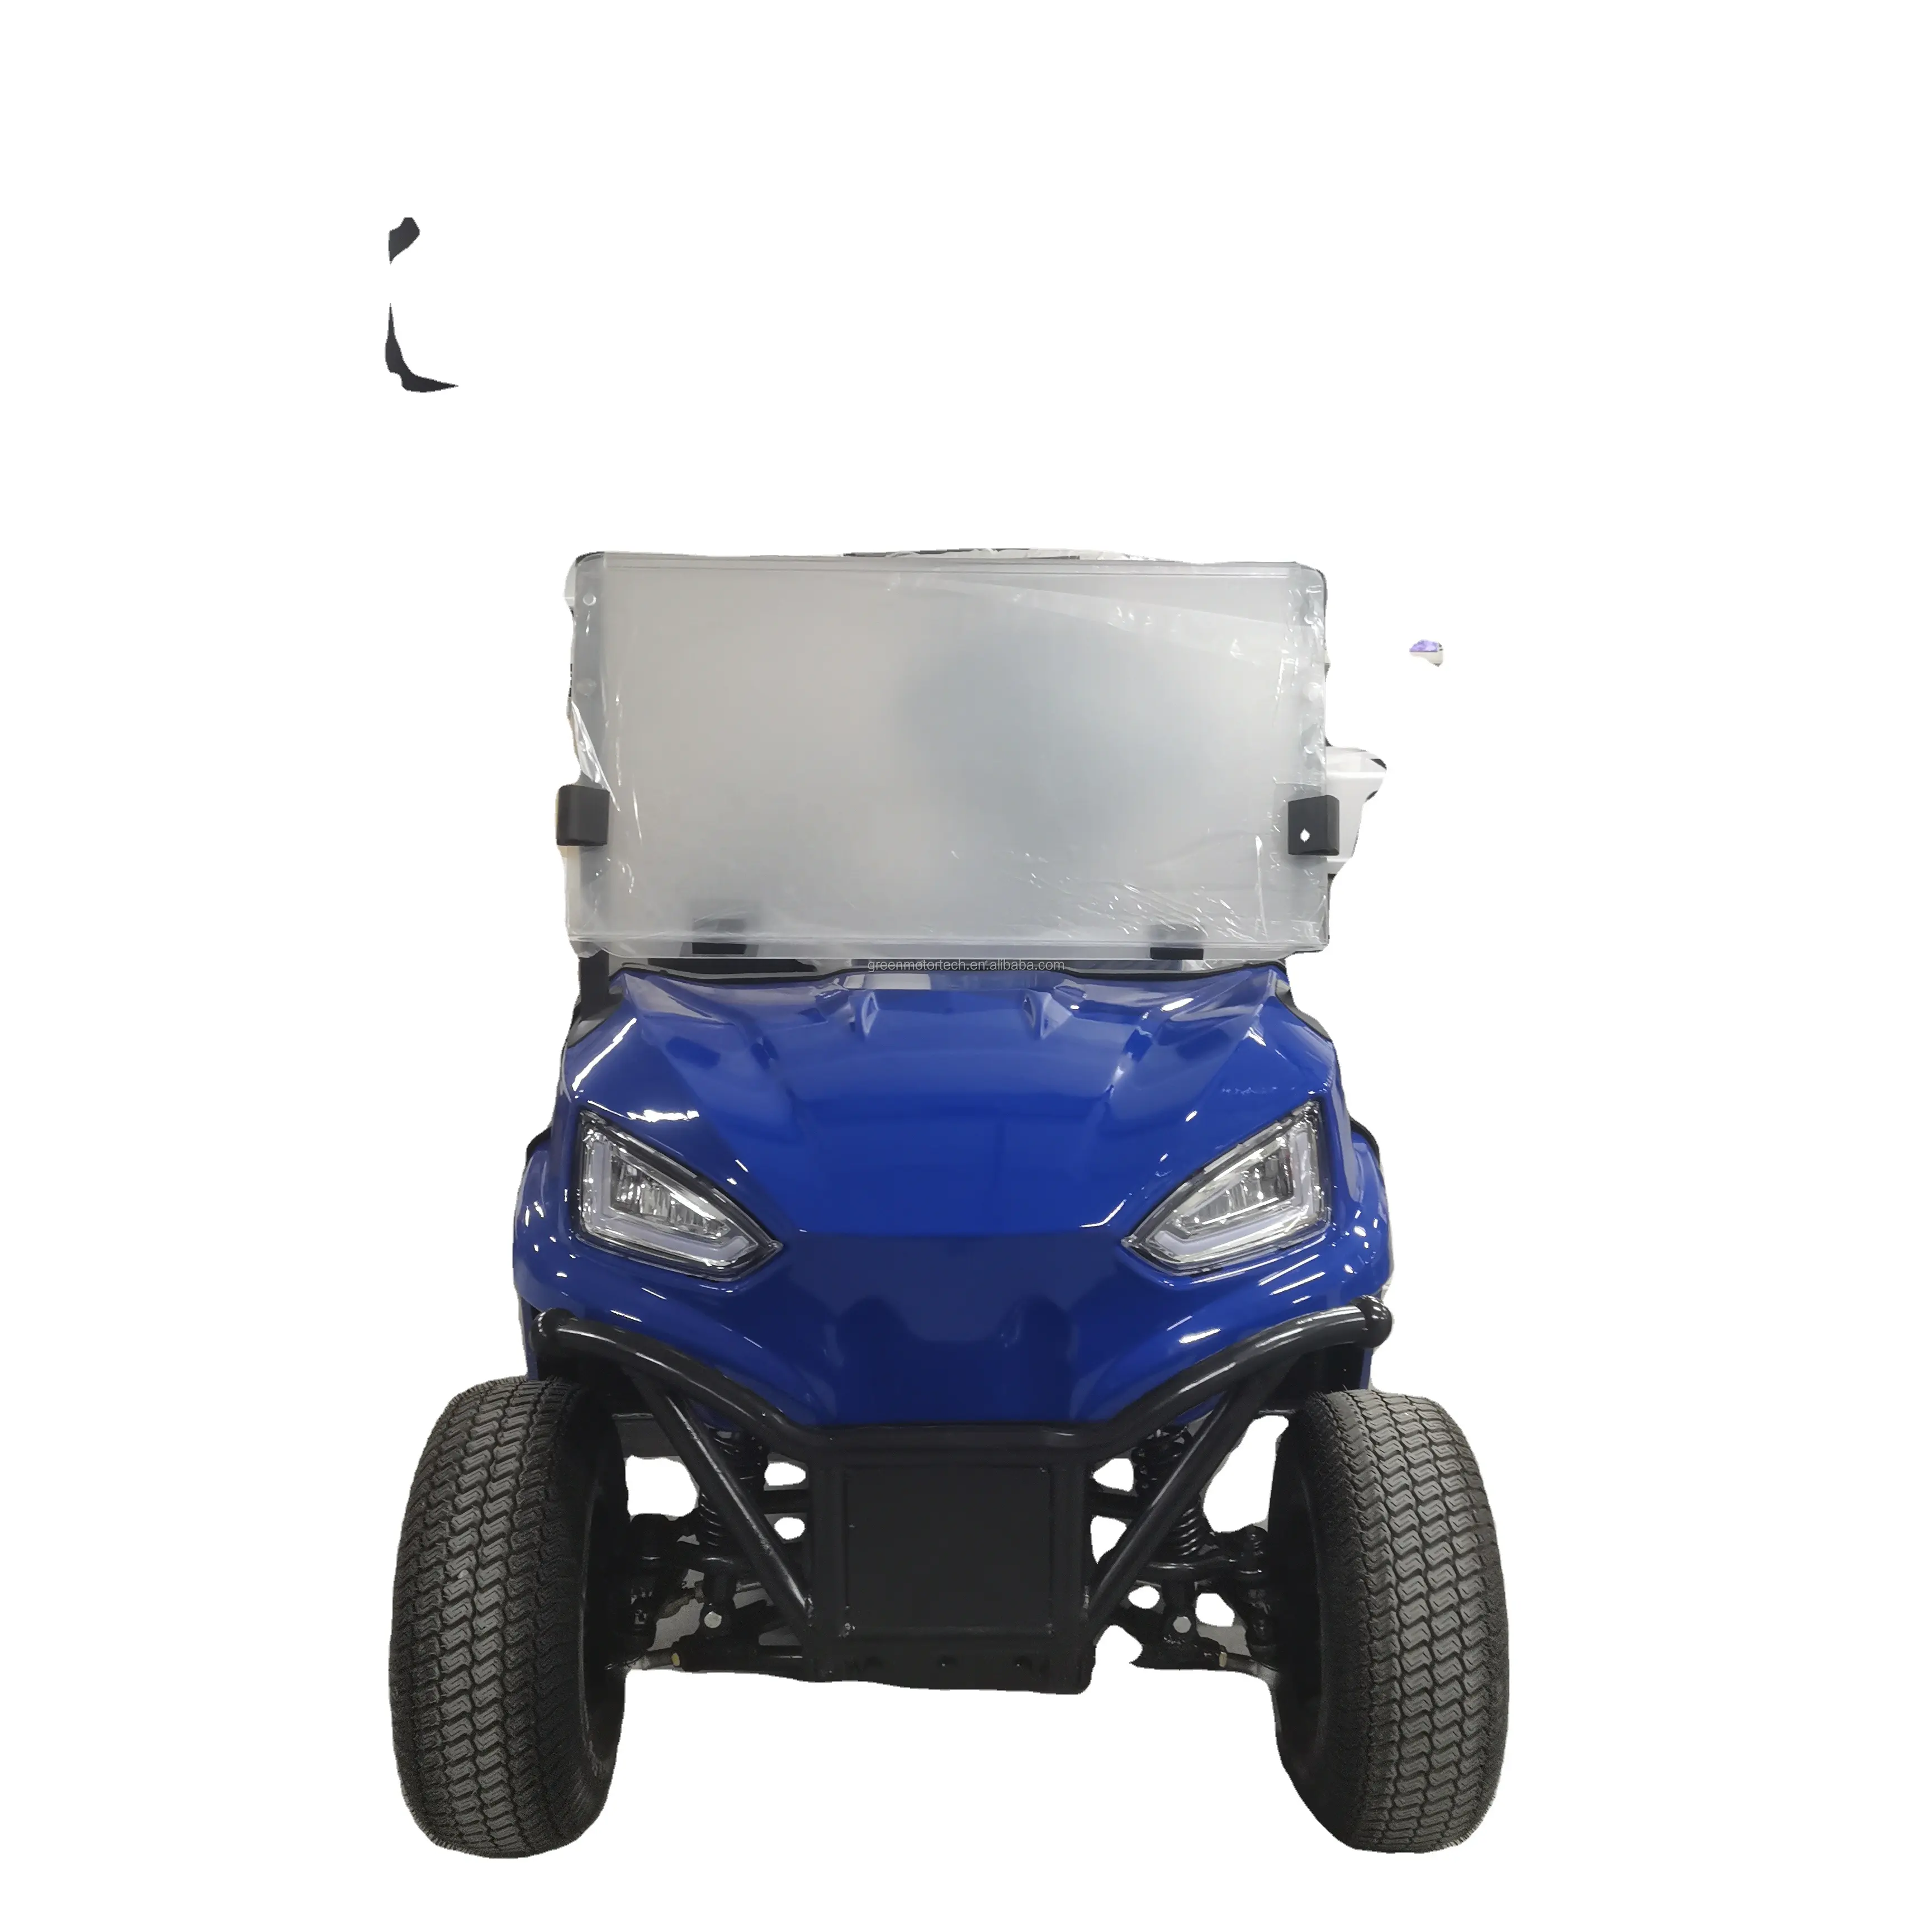 reliable and powerful one seat single passenger electric golf car for Golf Club Golf course lithium battery powered